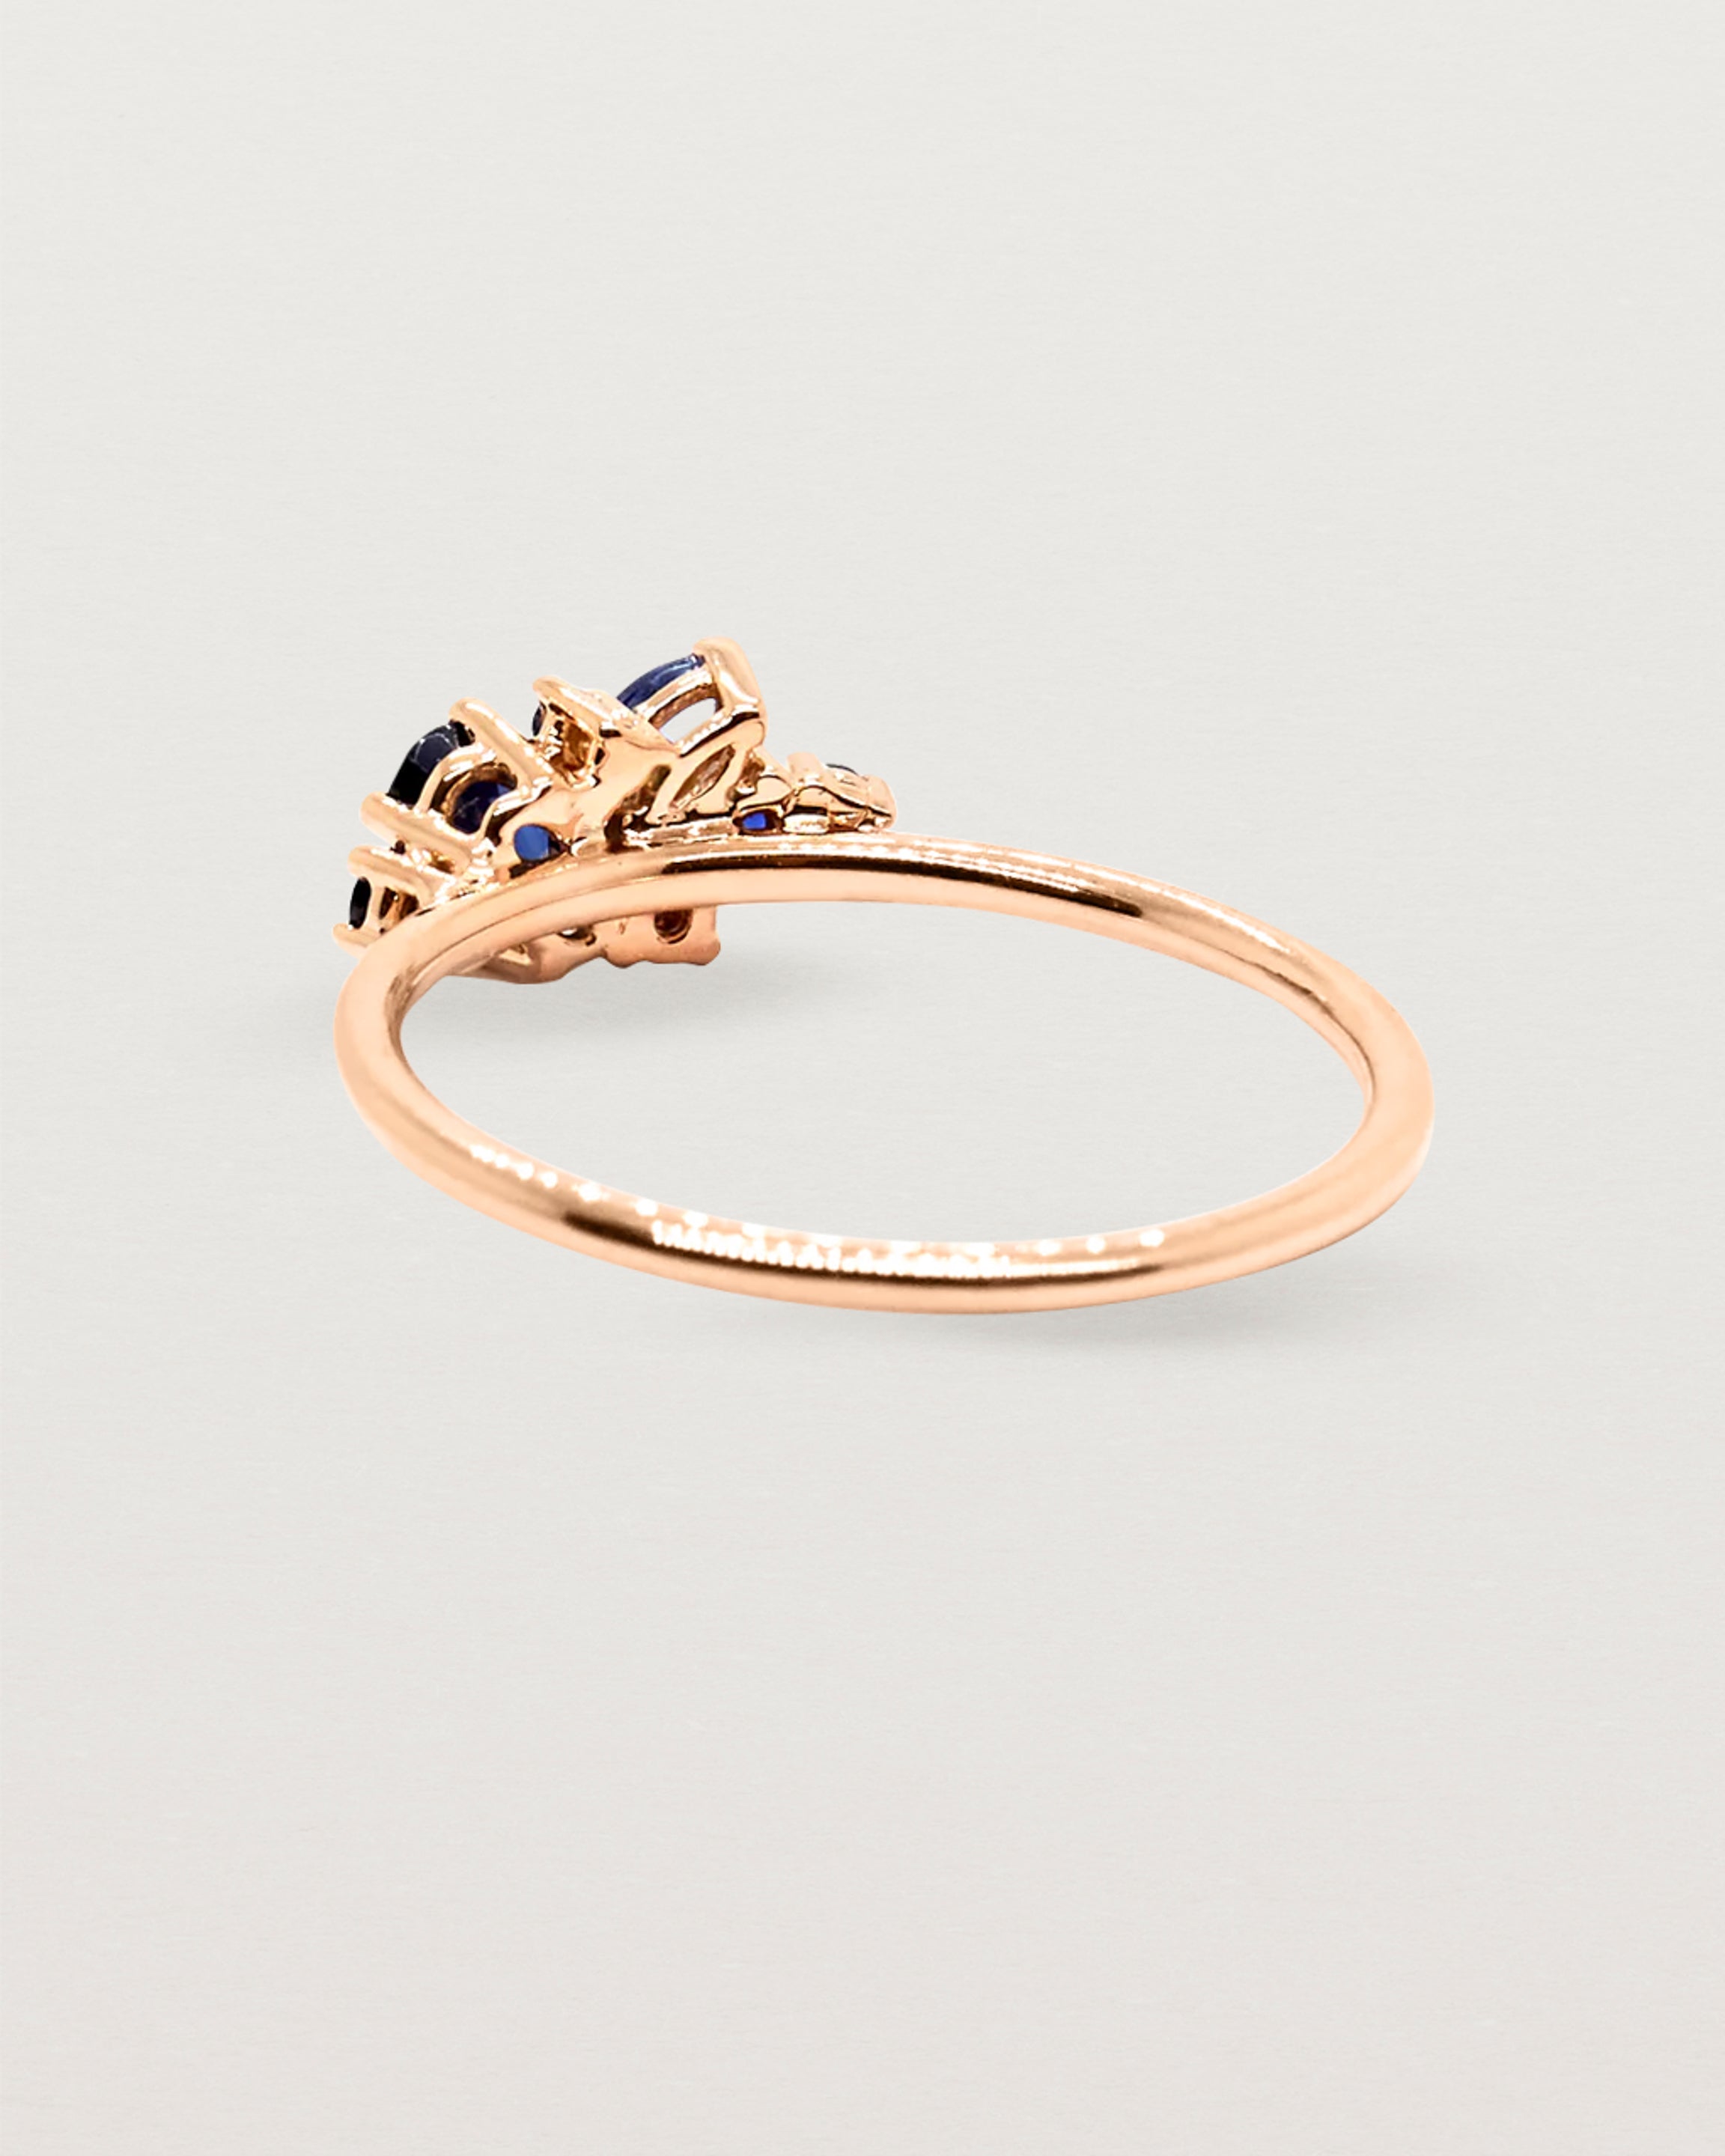 Deep blue sapphire cluster ring, featuring marquise, oval and round stones, crafted in rose gold